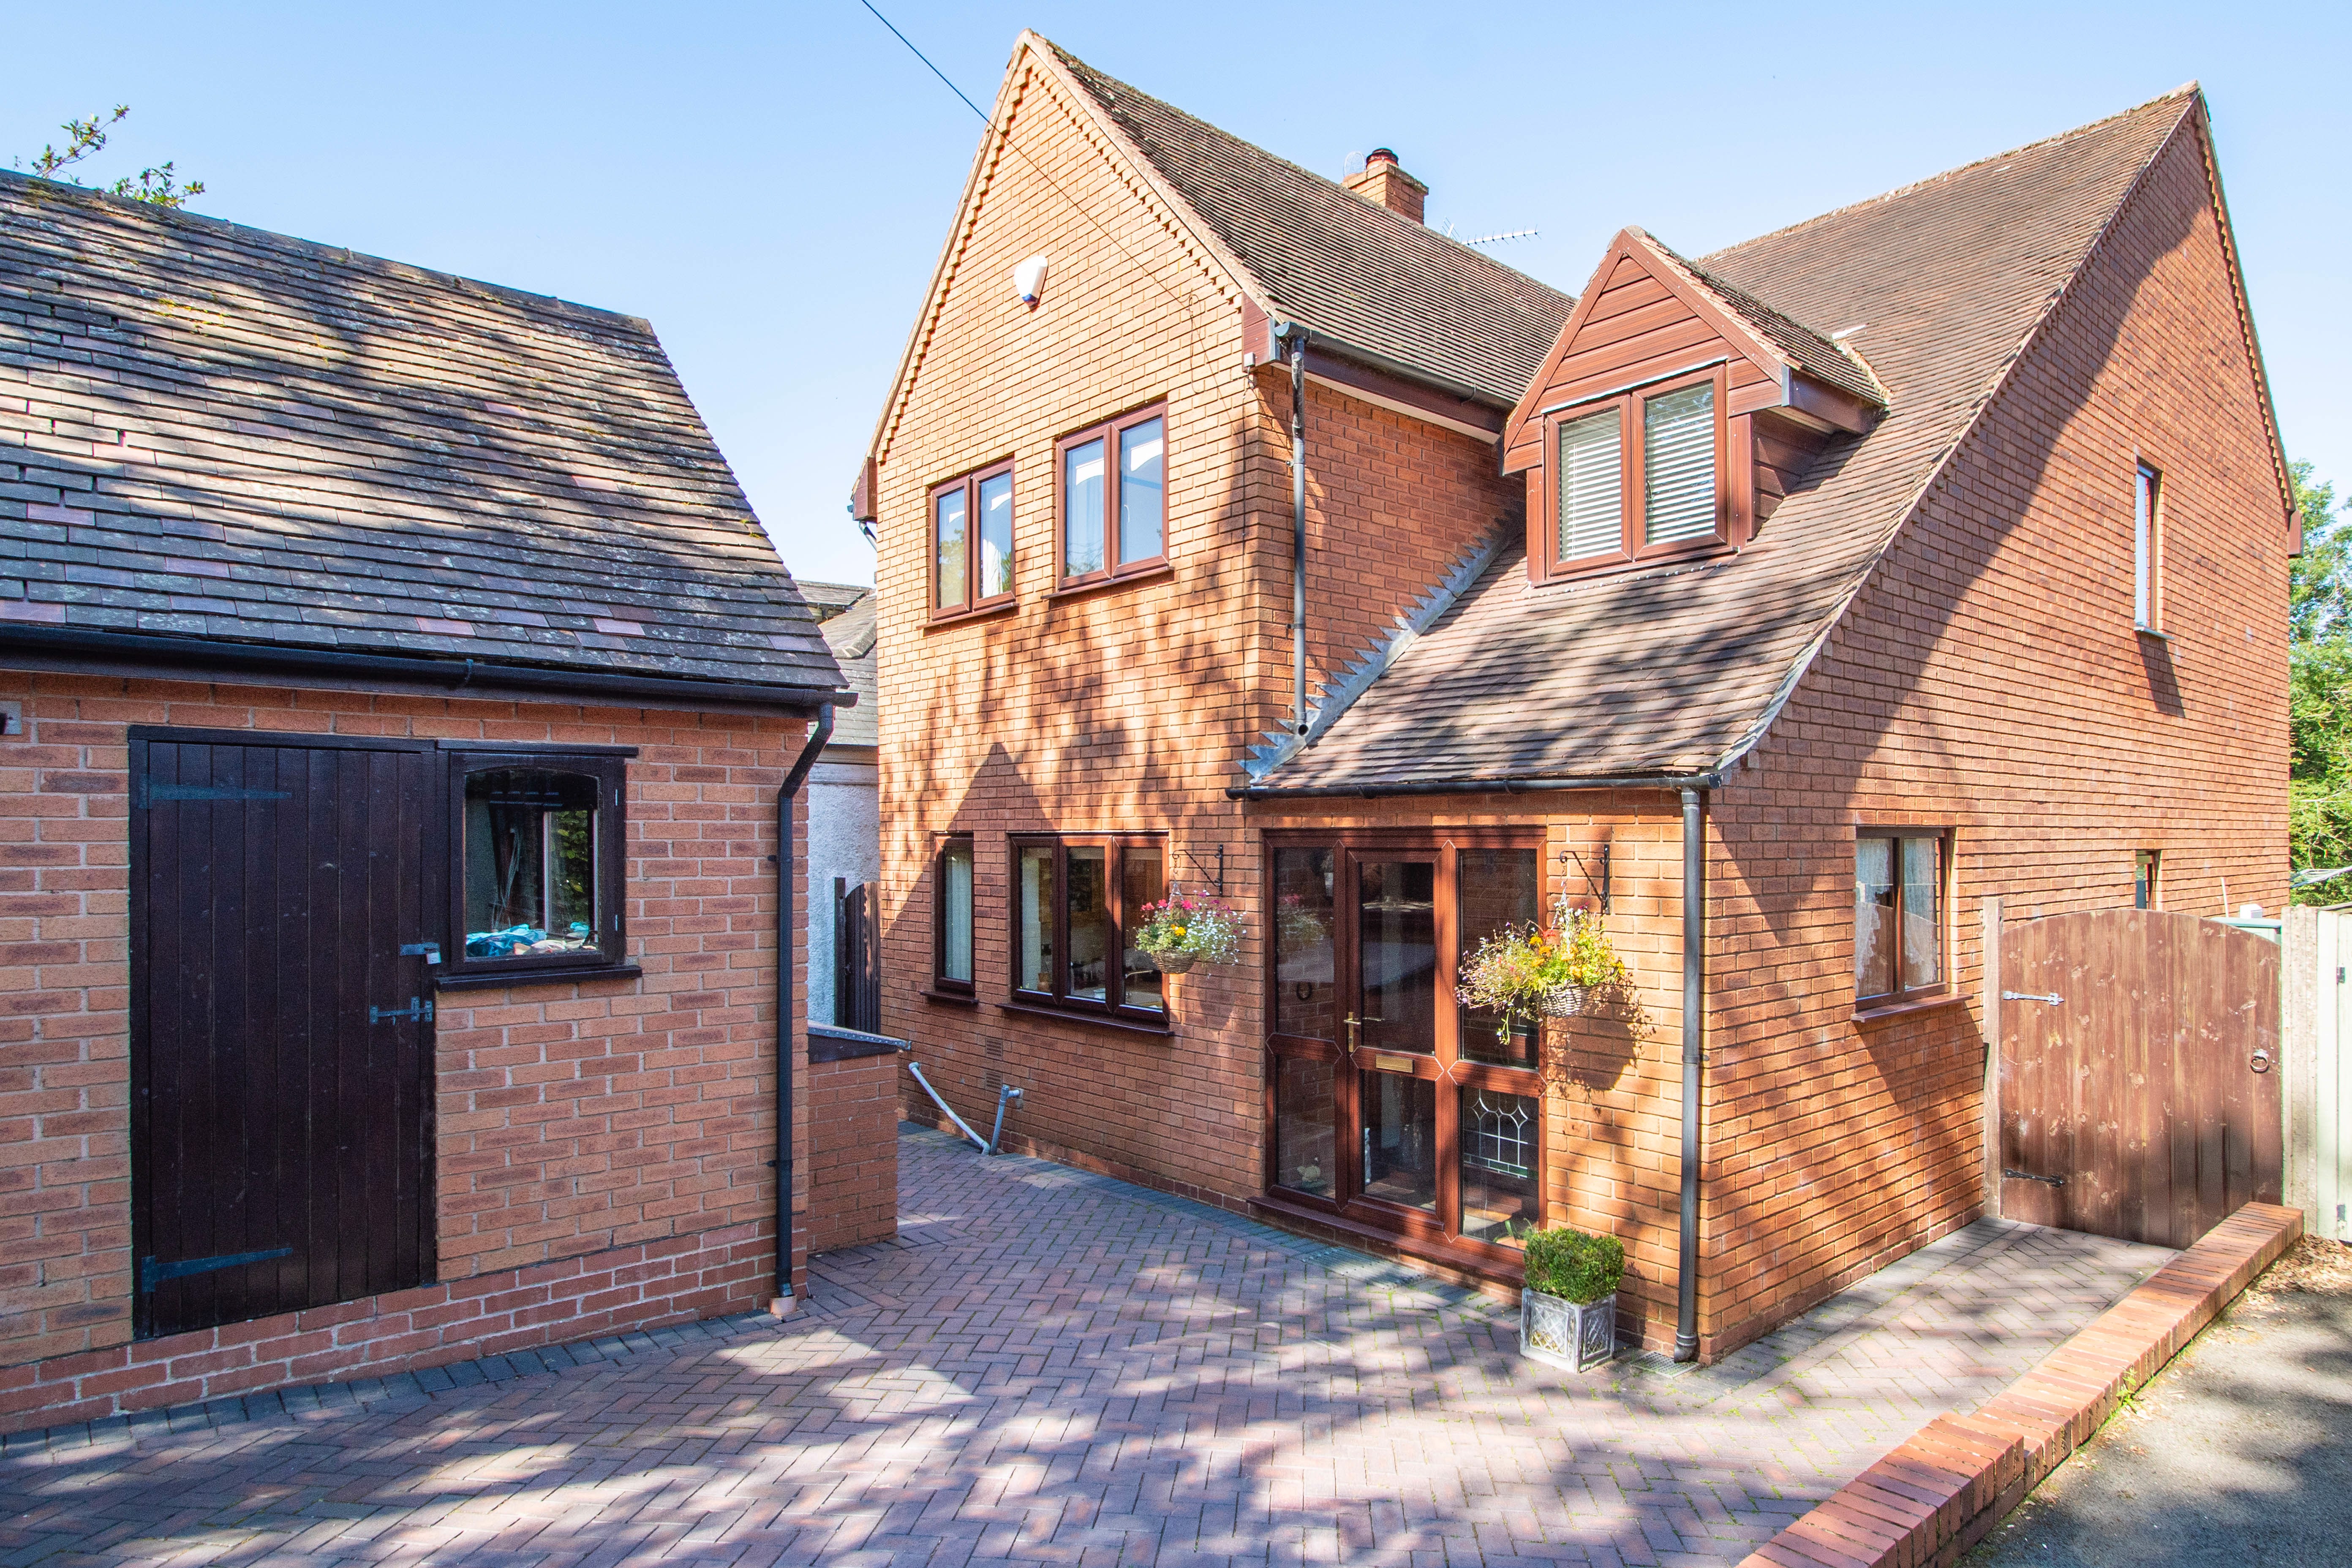 4 bed house for sale in Crumpfields Lane, Webheath 1